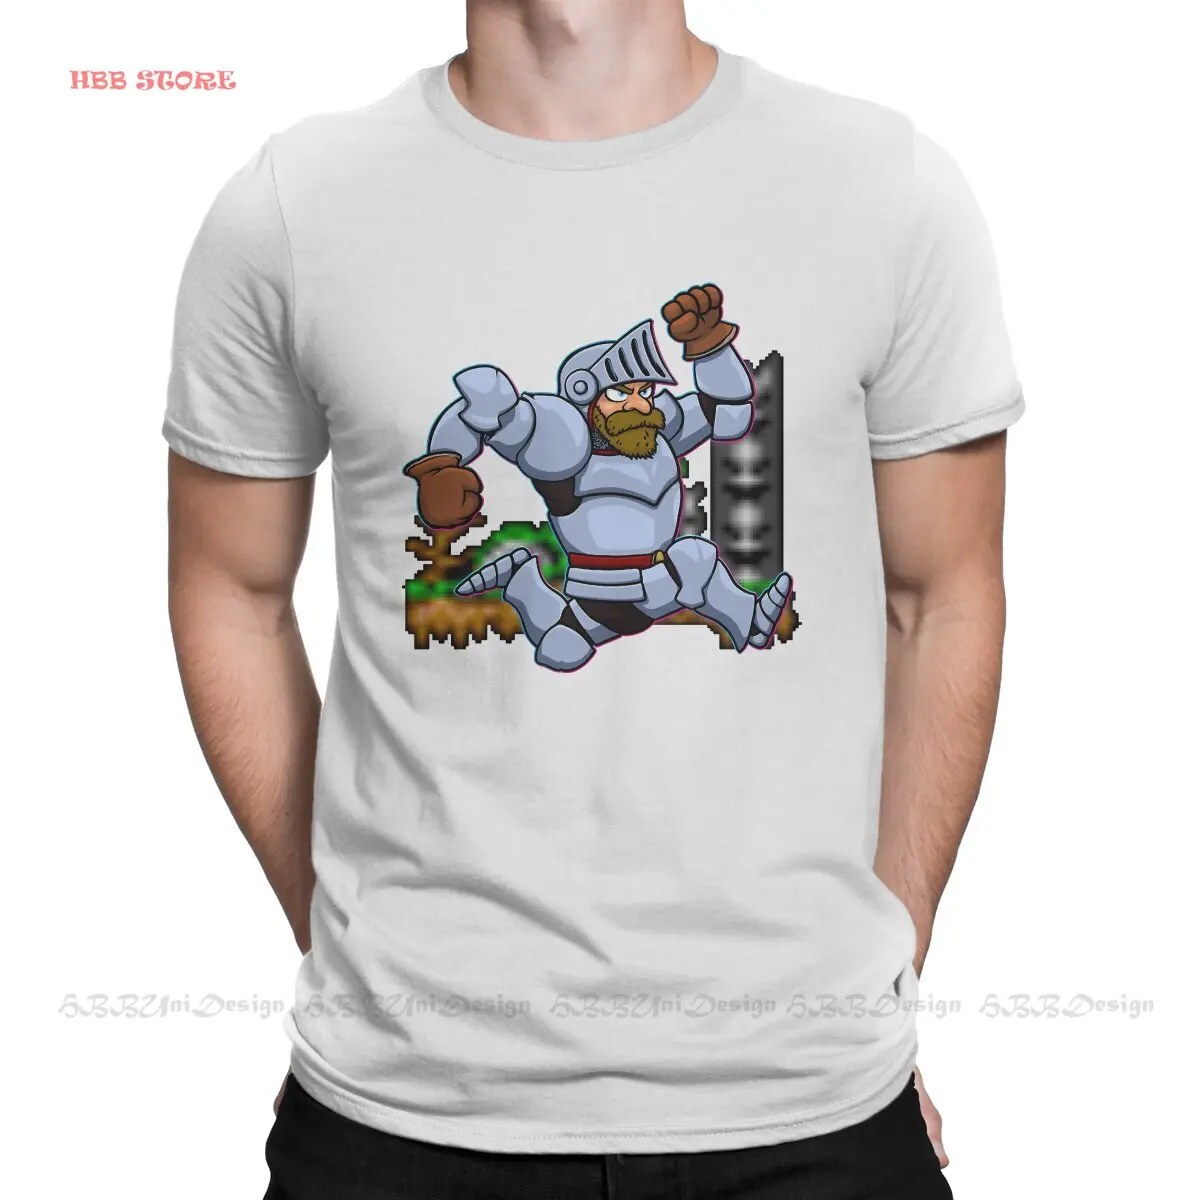 Arthur Run Special TShirt Ghost and goblins Top Quality New Design Graphic  T Shirt Stuff Hot Sale